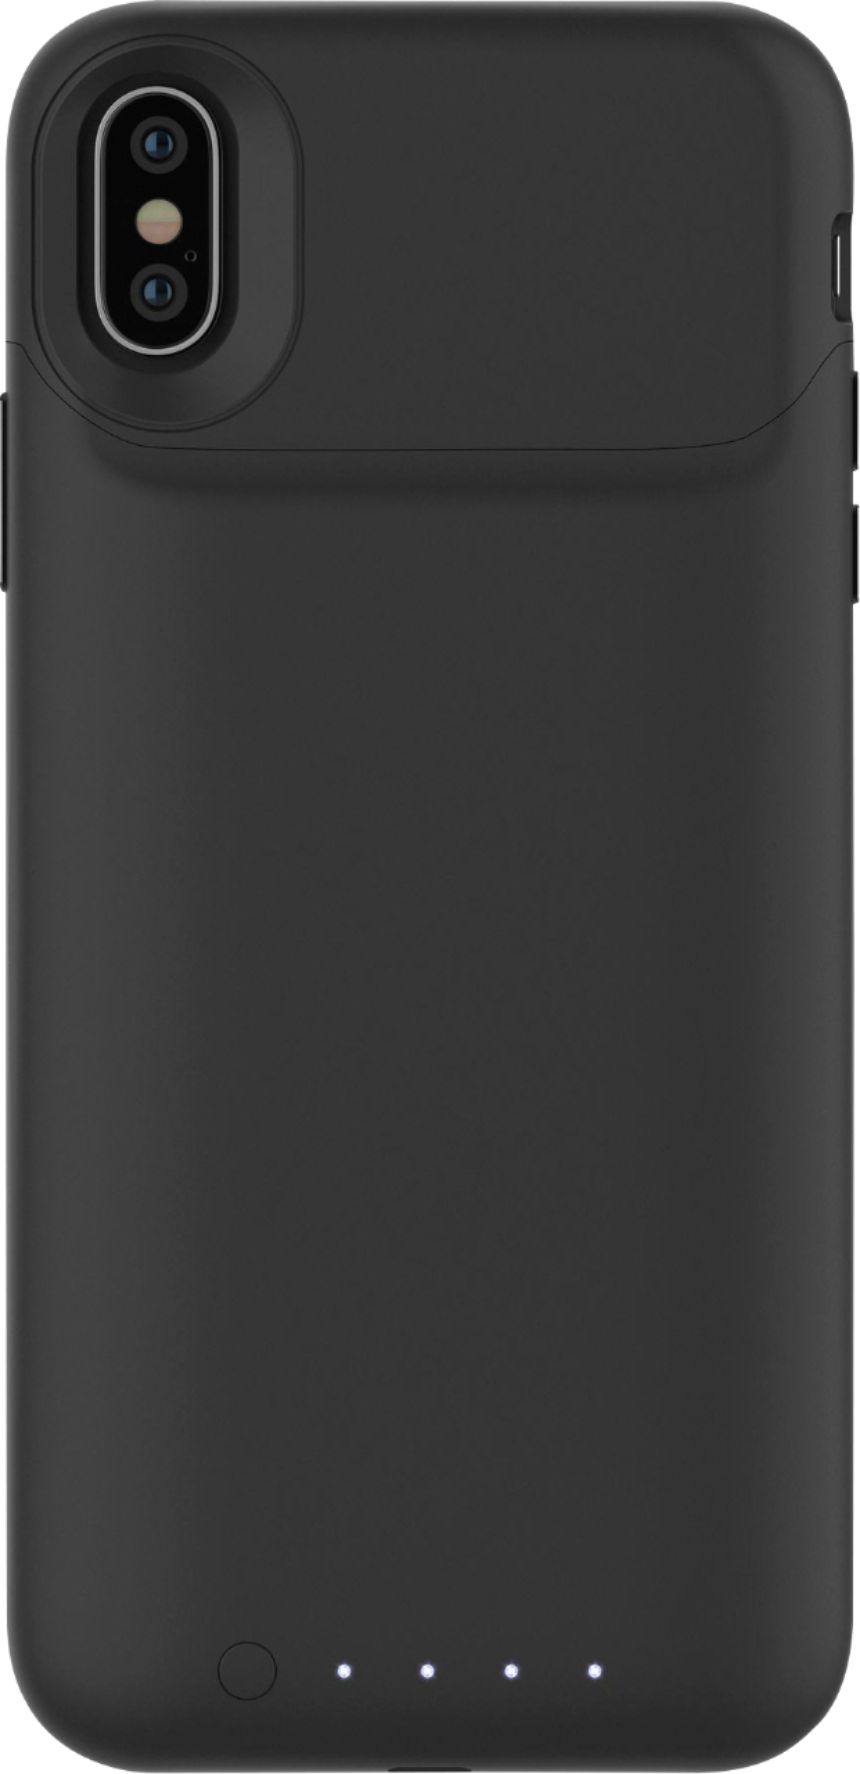 mophie - Juice Pack Air External Battery Case with Wireless Charging for Apple® iPhone® X - Black